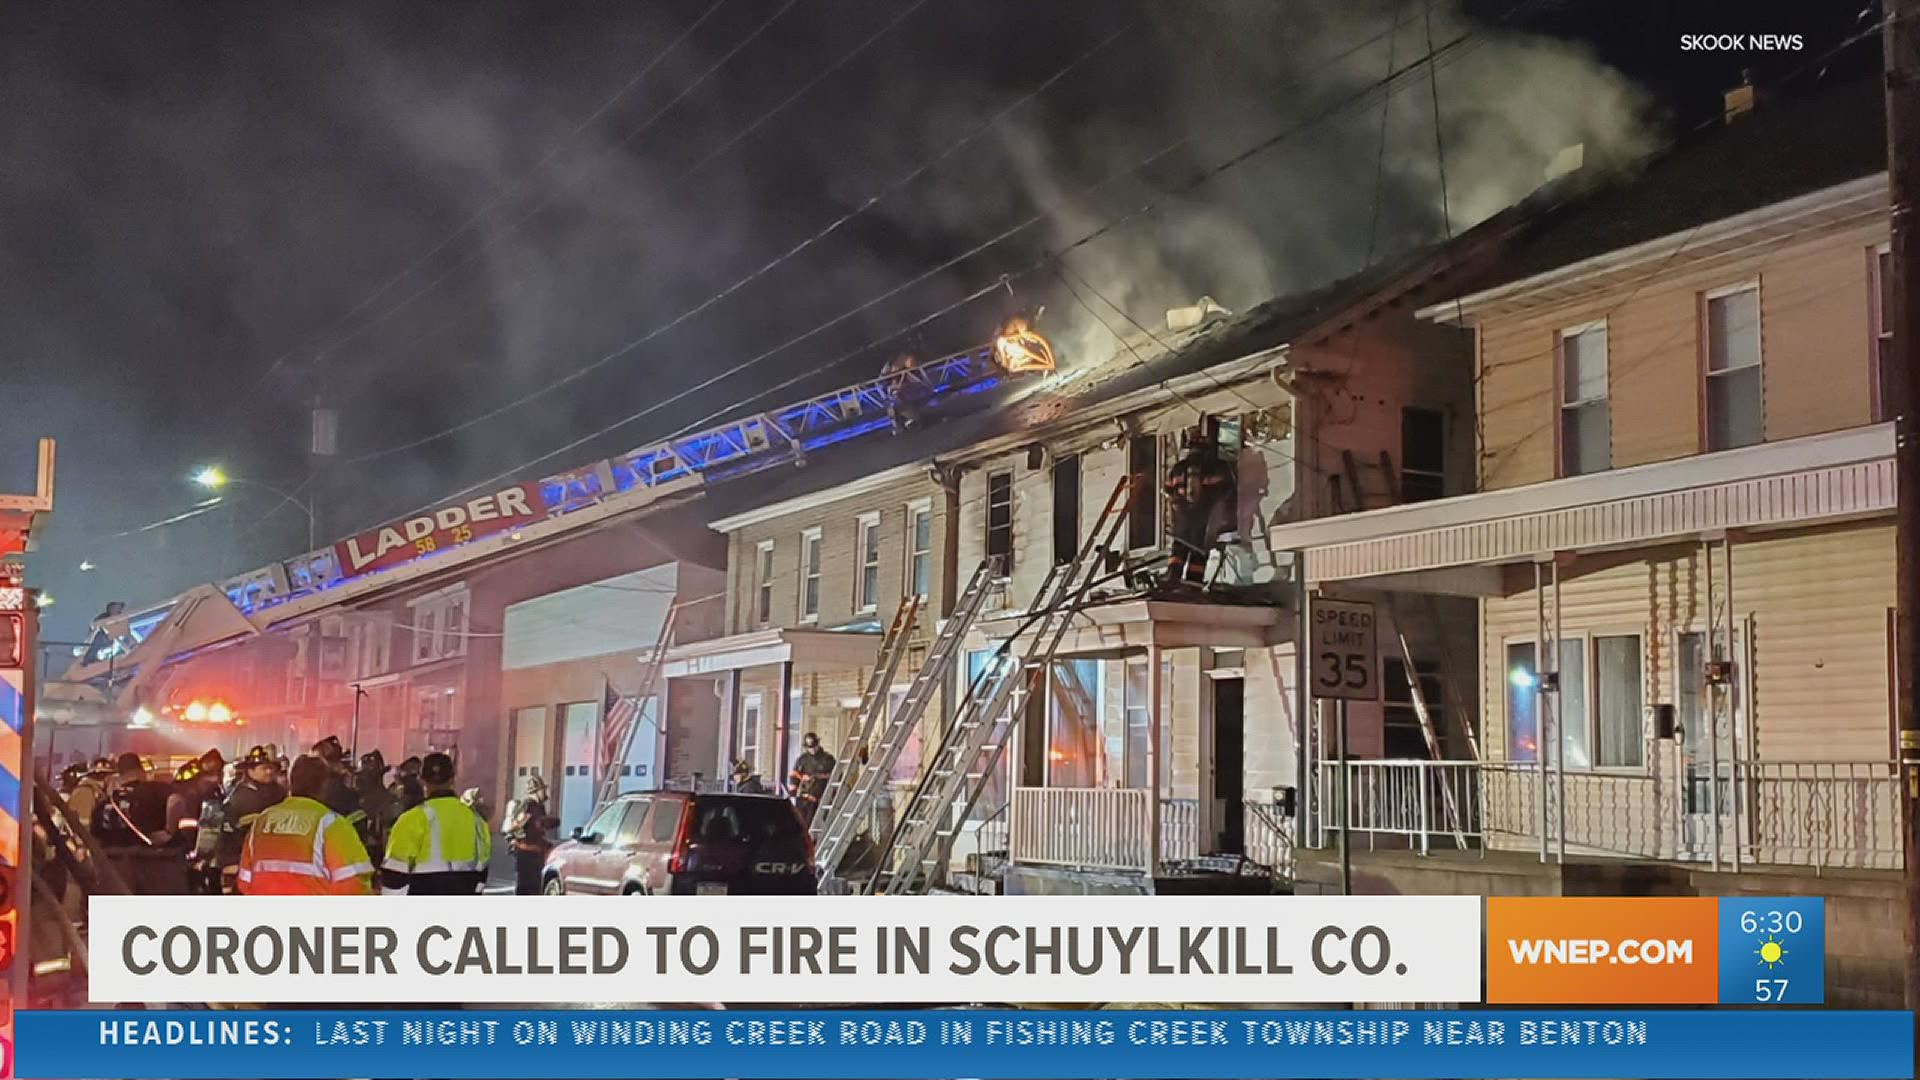 At least one person is dead after a fire early Monday morning in Schuylkill County.